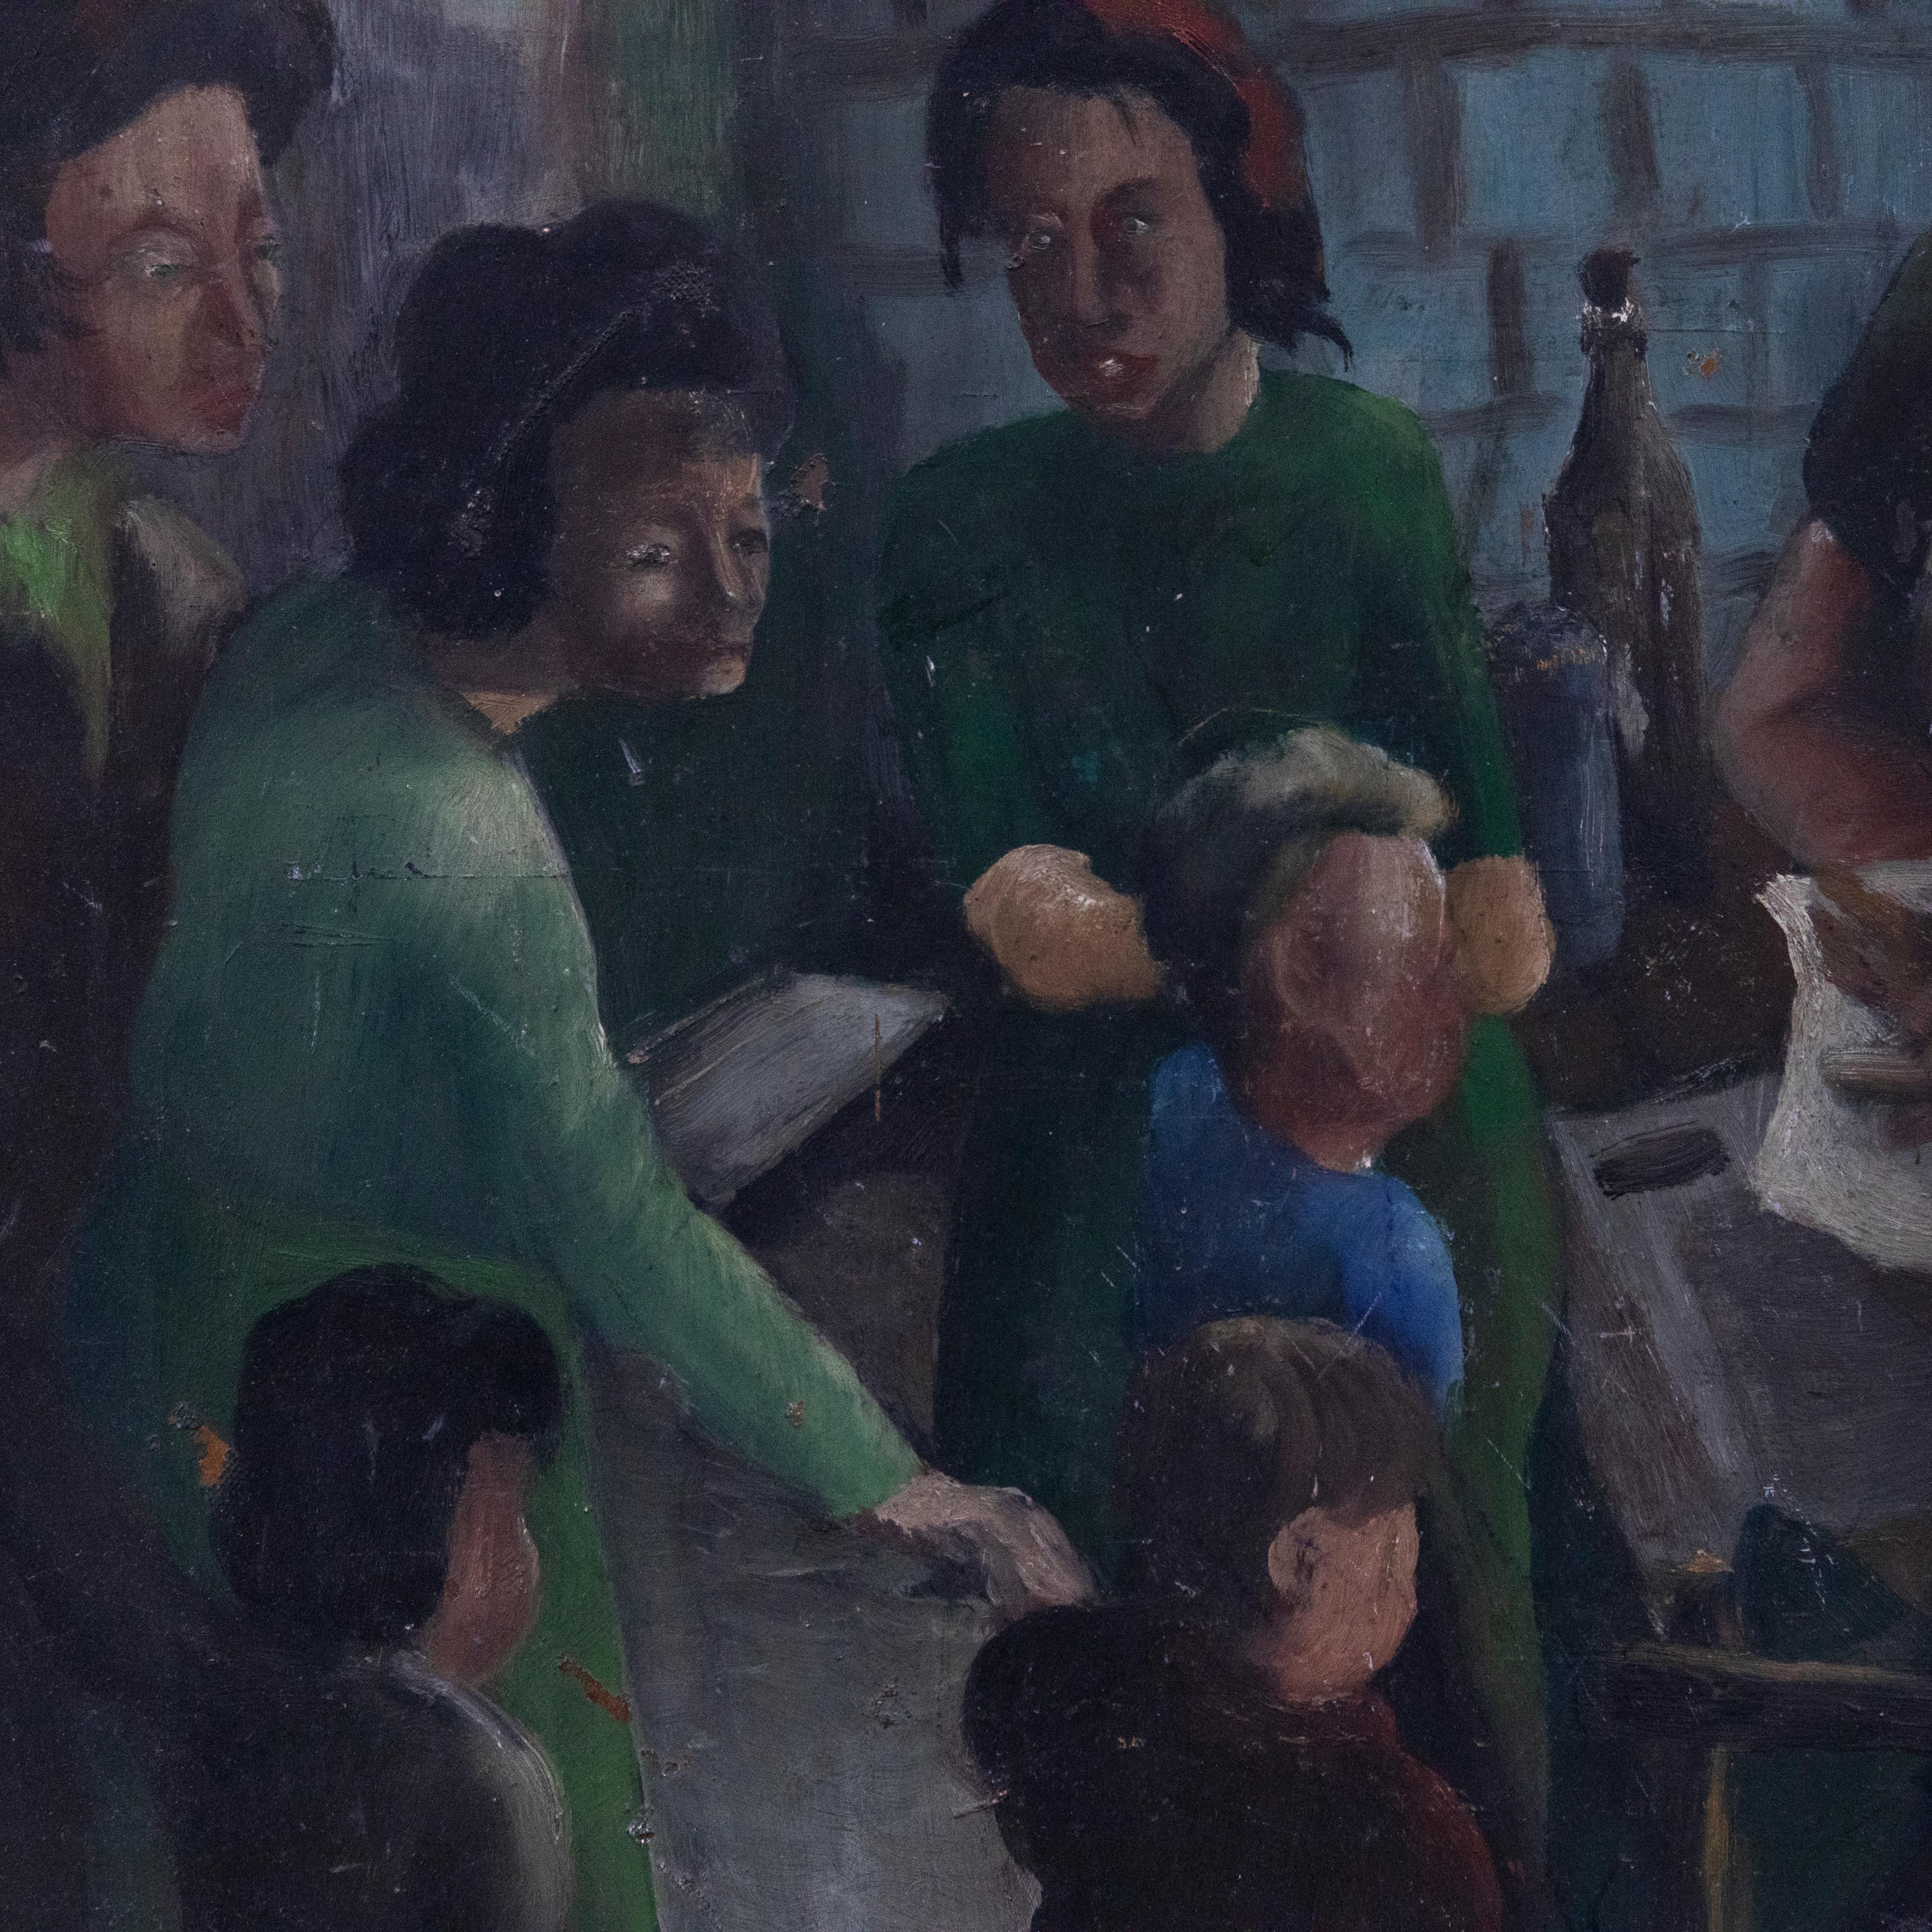 A wonderful mid-century study of a busy fish & chip shop - a staple of the British high street. Mothers and children are depicted crowding the shop as they await their food. The artist has completed the composition with a naive sensibility that adds